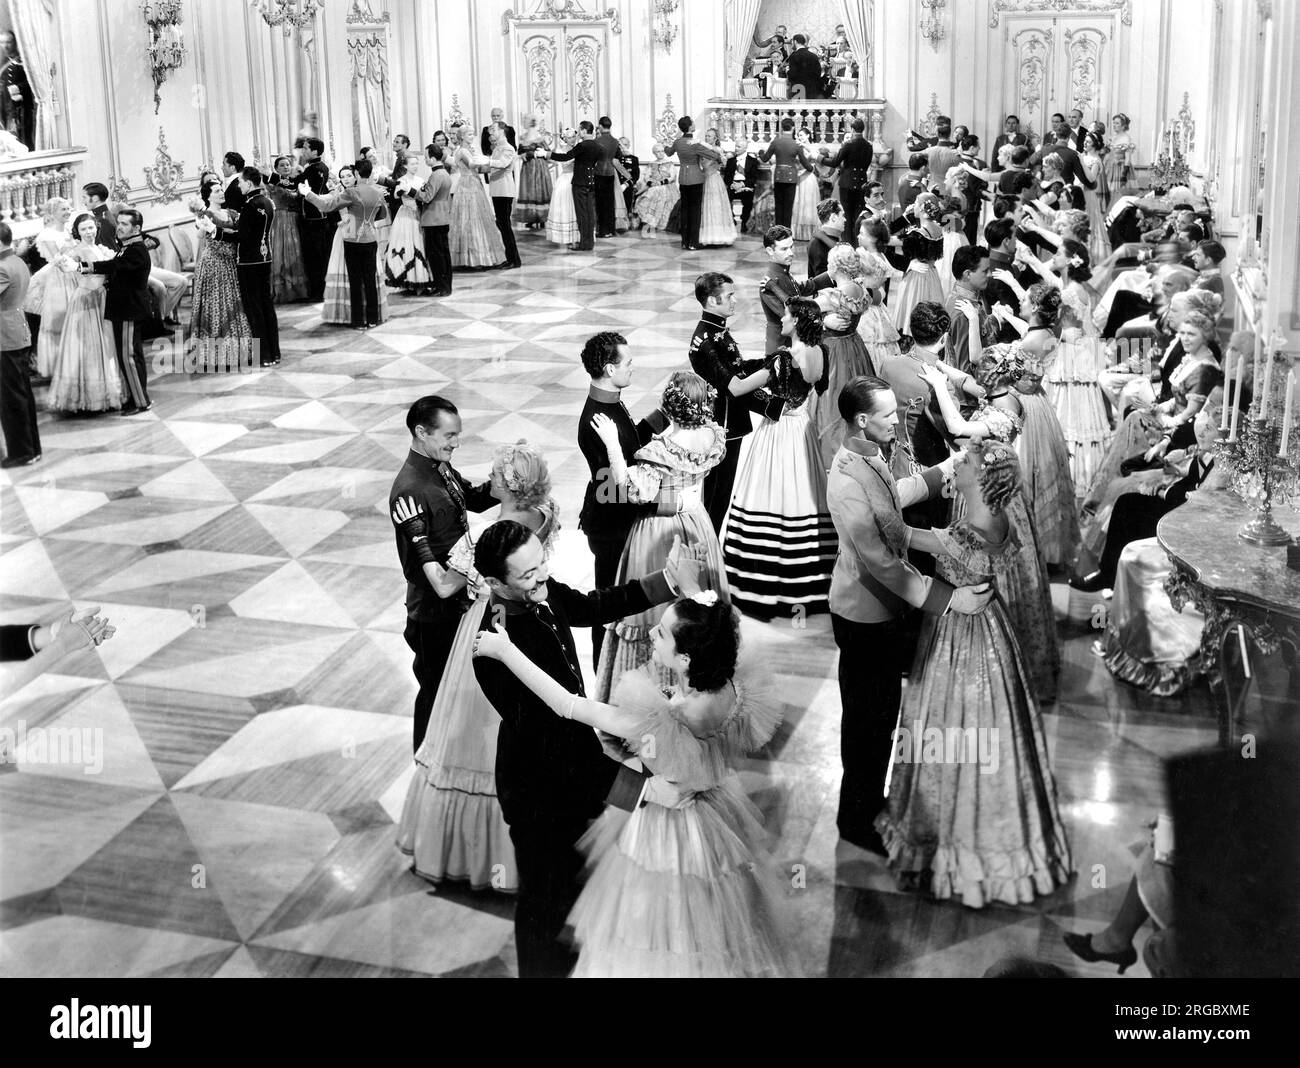 Waltz dance Black and White Stock Photos & Images - Alamy